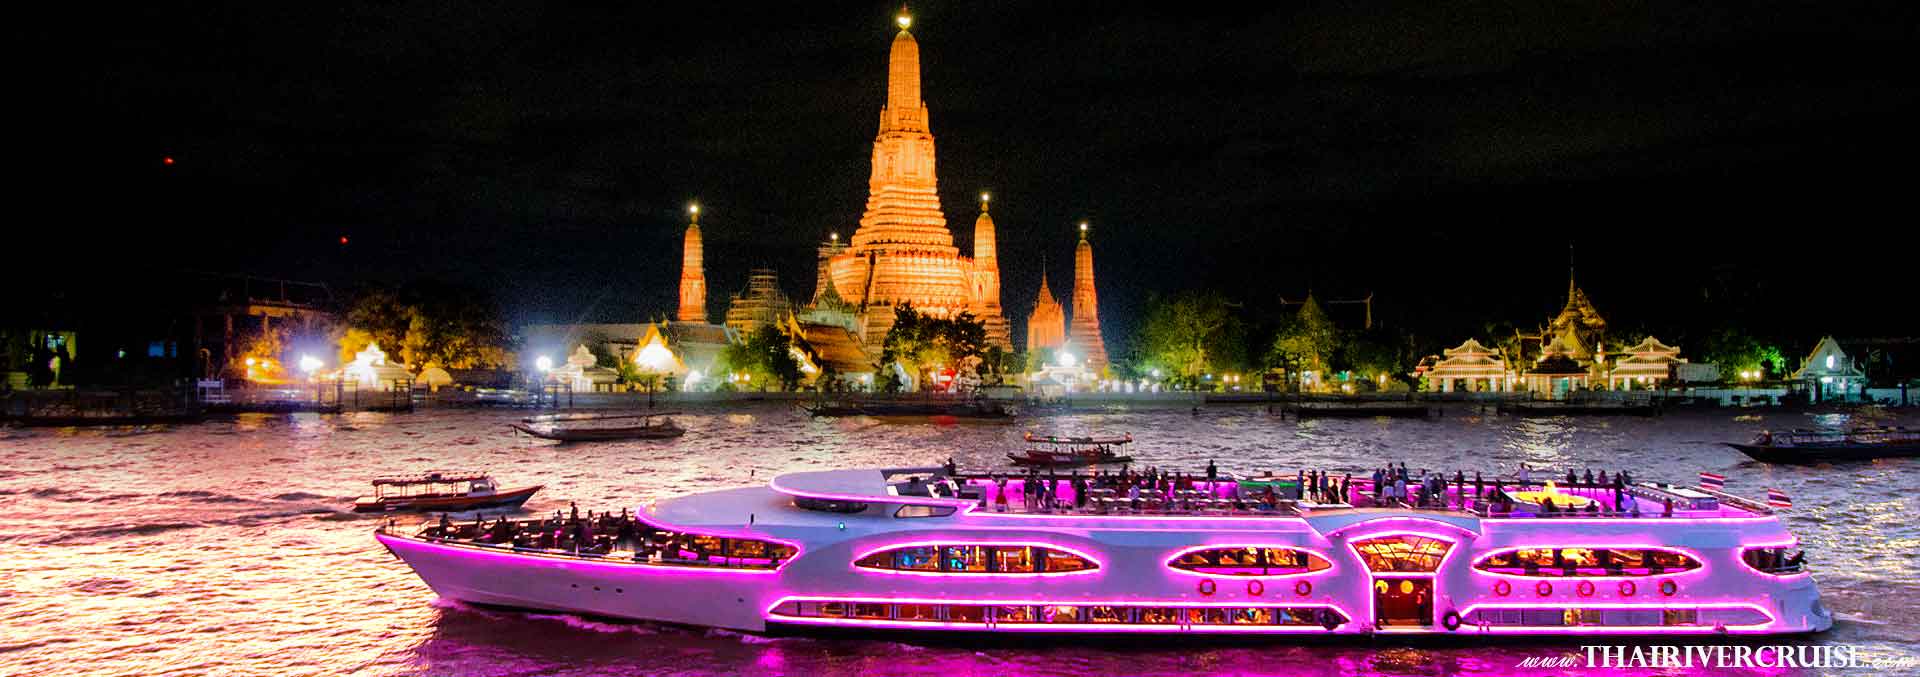 Wonderful Pearl Cruise Dinner Cruise ฺBangkok Promotion Discount Cheap Ticket Price Offers